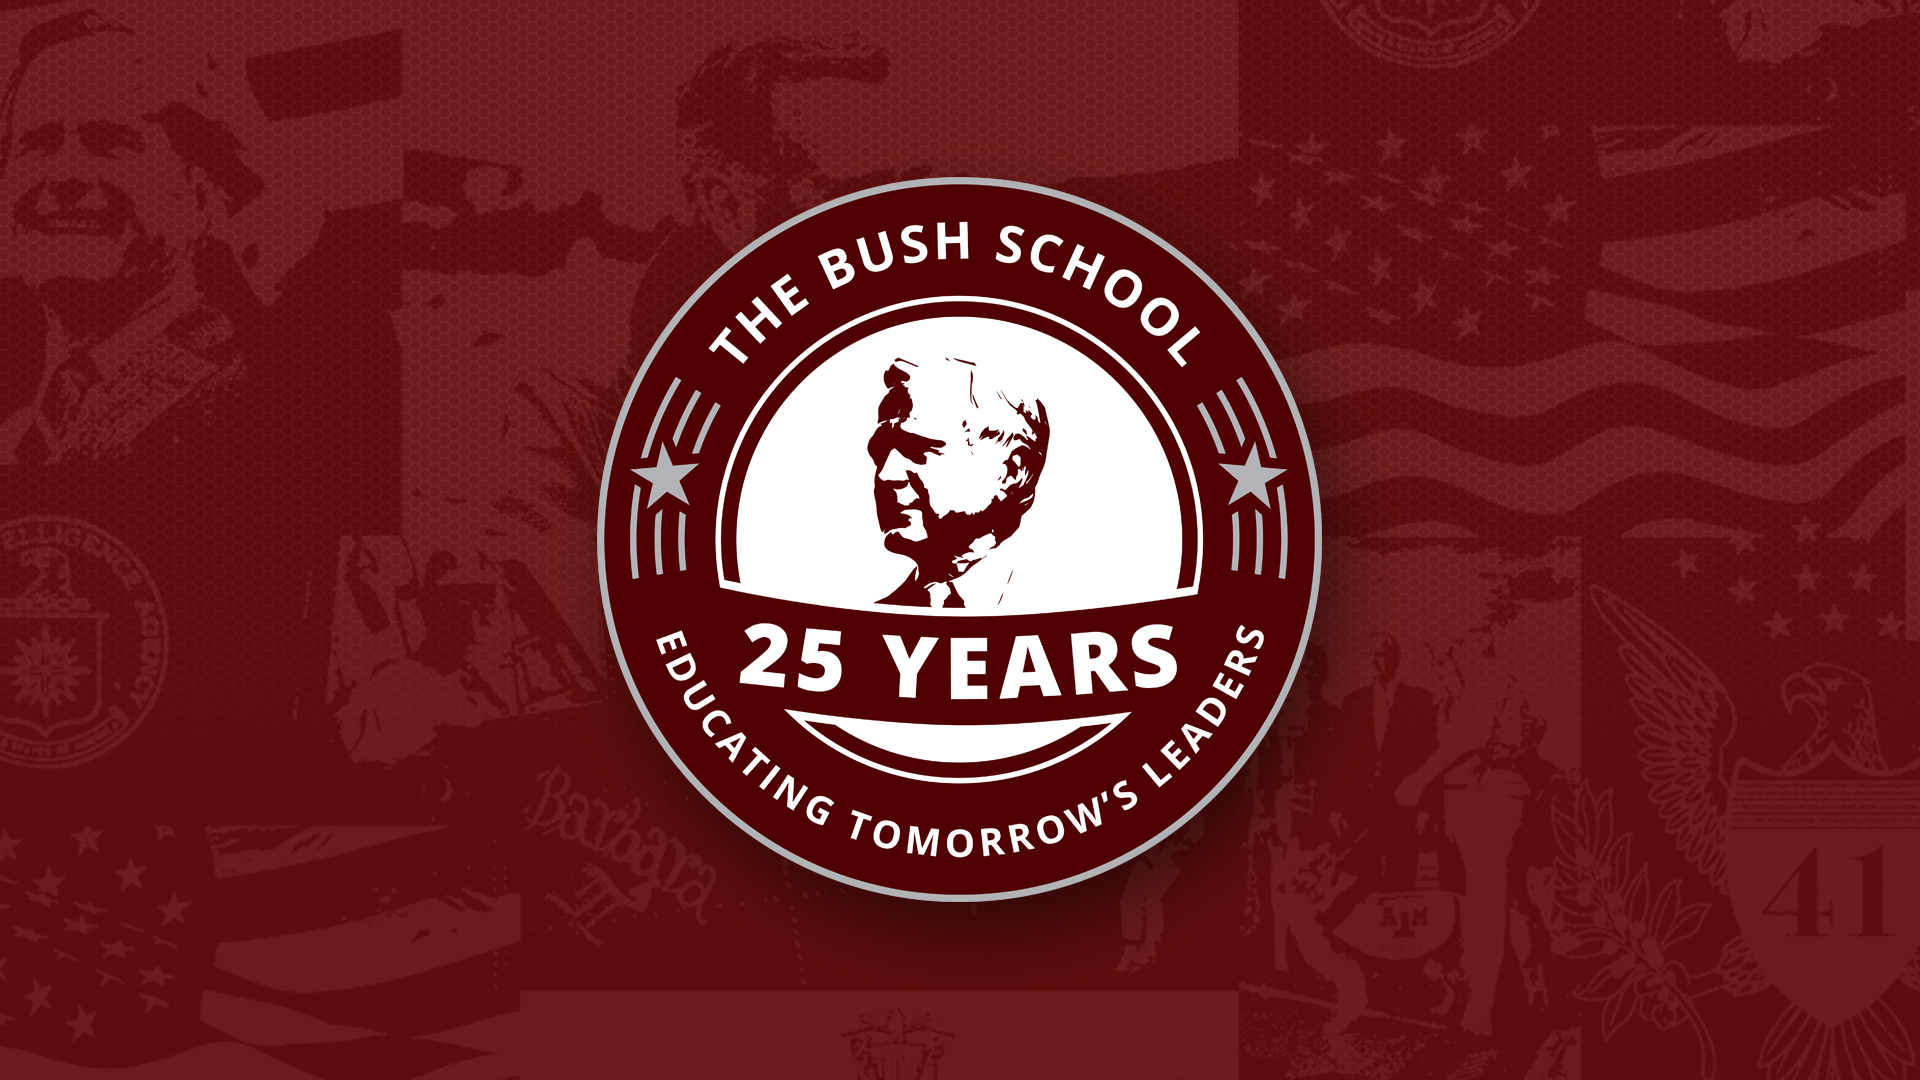 25th Anniversary - Primary logo on a maroon background - Desktop Background